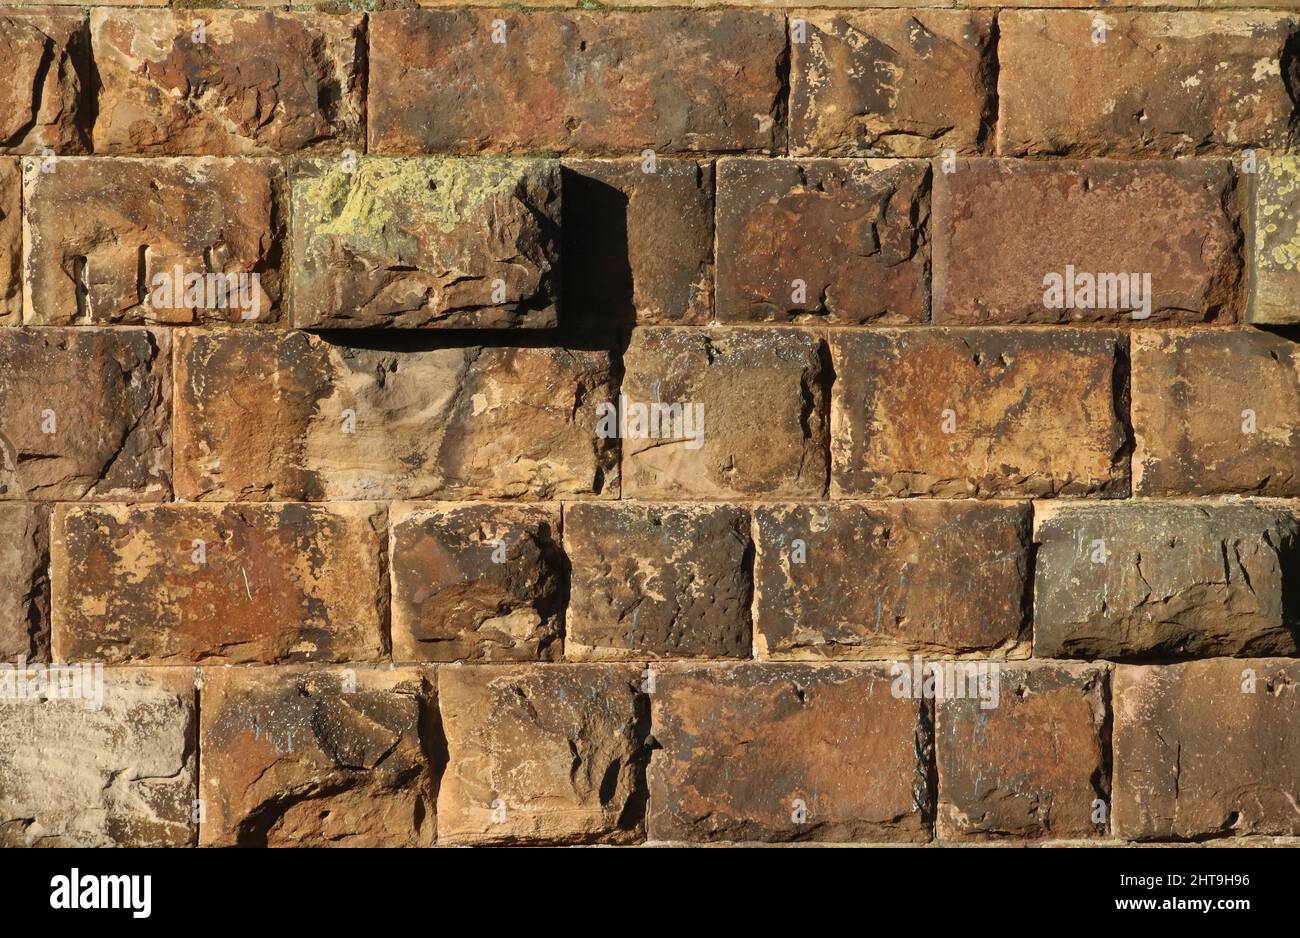 Close up showing details of the stone blocks on one of the rusticated masonry river piers of Carlisle bridge, or Lune bridge, Lancaster. Stock Photo